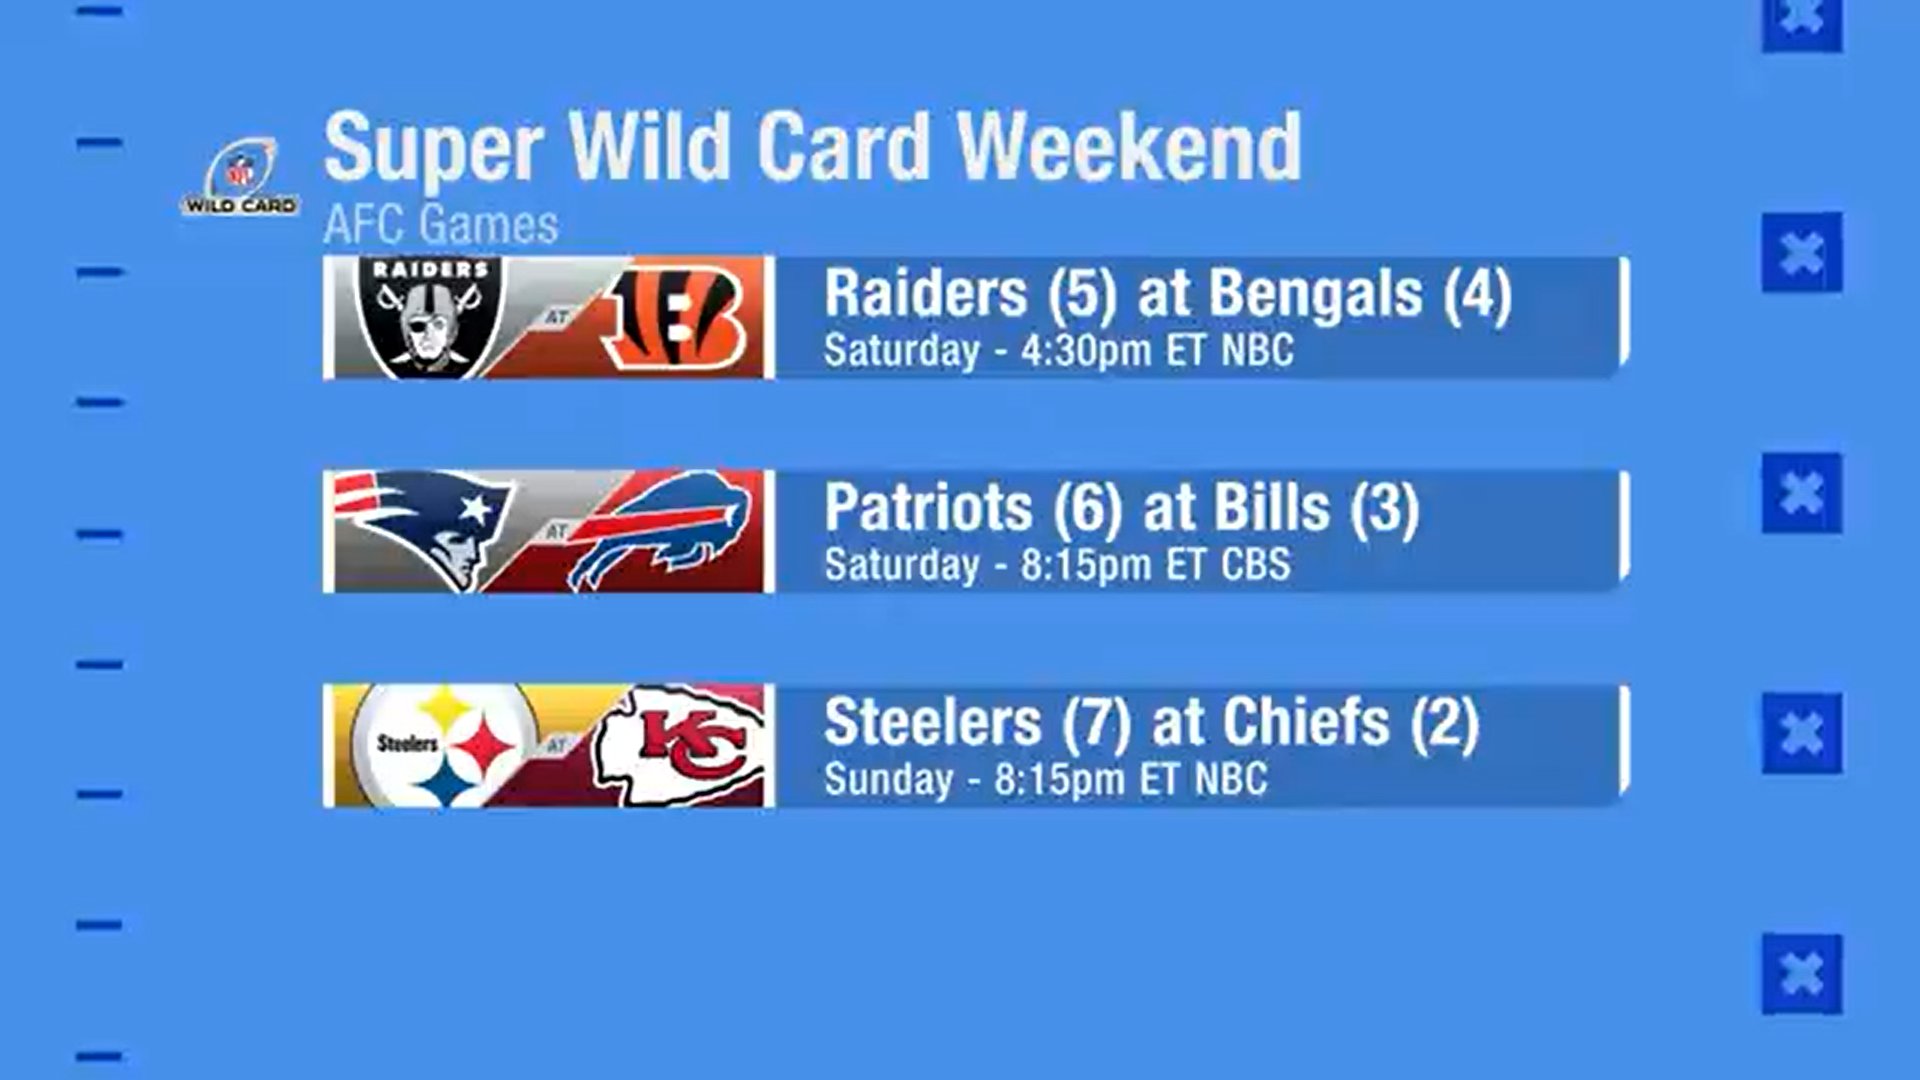 NFL Super Wild Card Weekend schedule 2022: How to watch AFC, NFC playoff  games, kickoff times, TV channel, dates, live streams - Big Cat Country